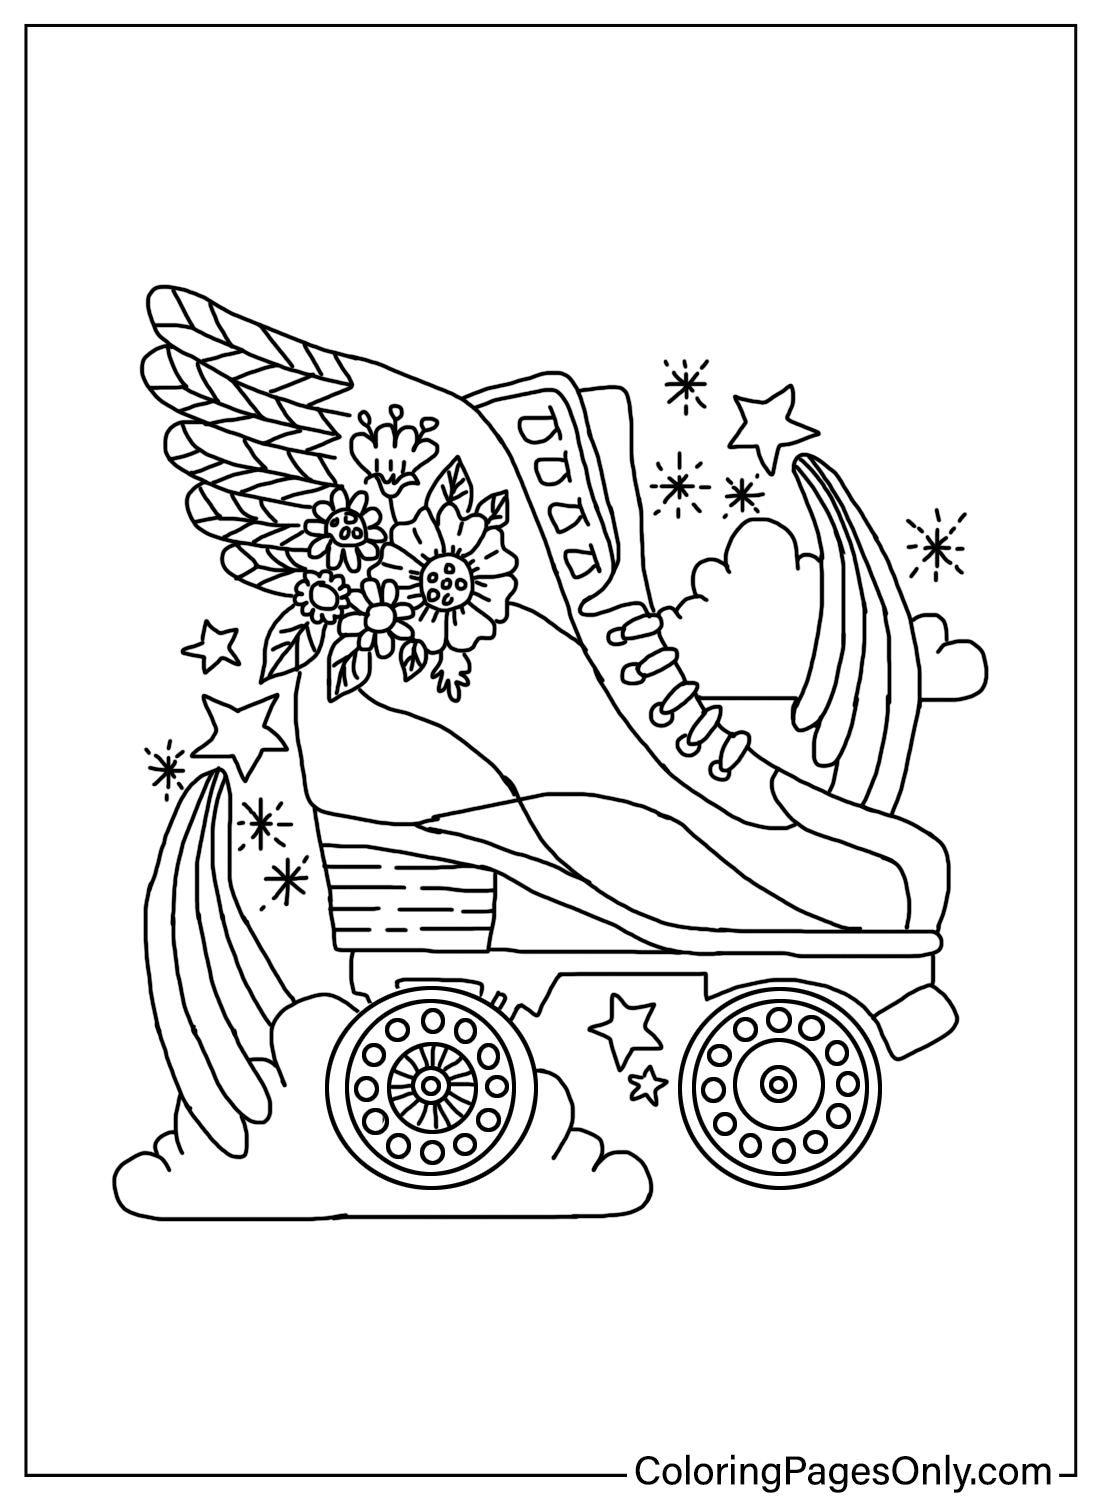 Roller Skate Hippie Coloring Page from Hippie